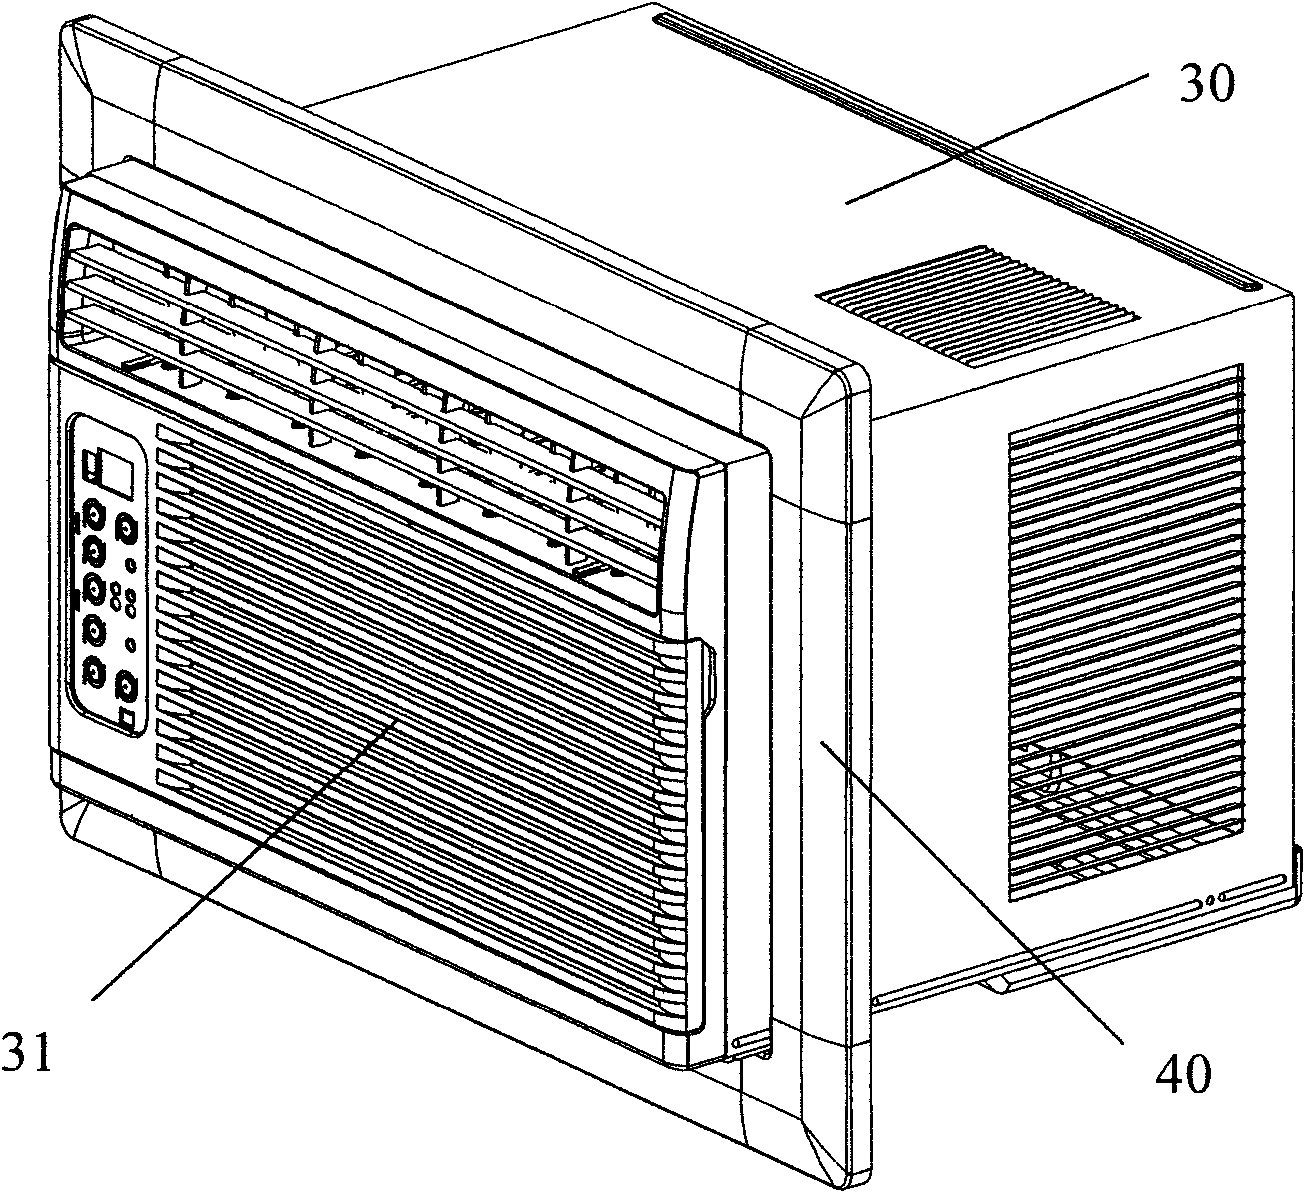 Wall-penetrating type air conditioner